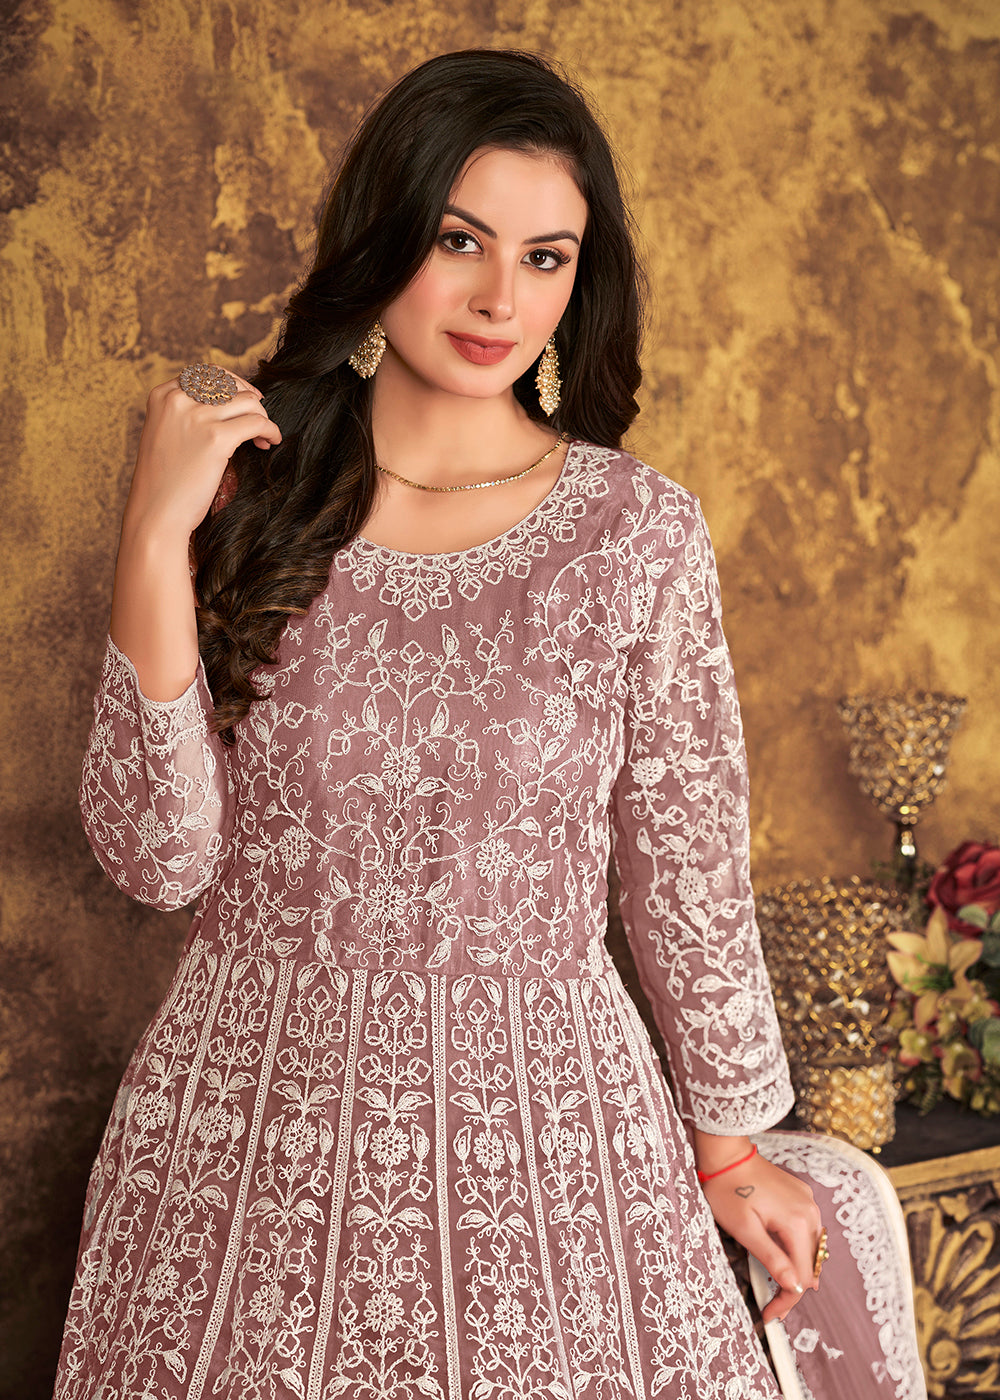 Buy Now Charming Mauve Cording Embroidered Wedding Anarkali Dress Online in Canada at Empress Clothing.